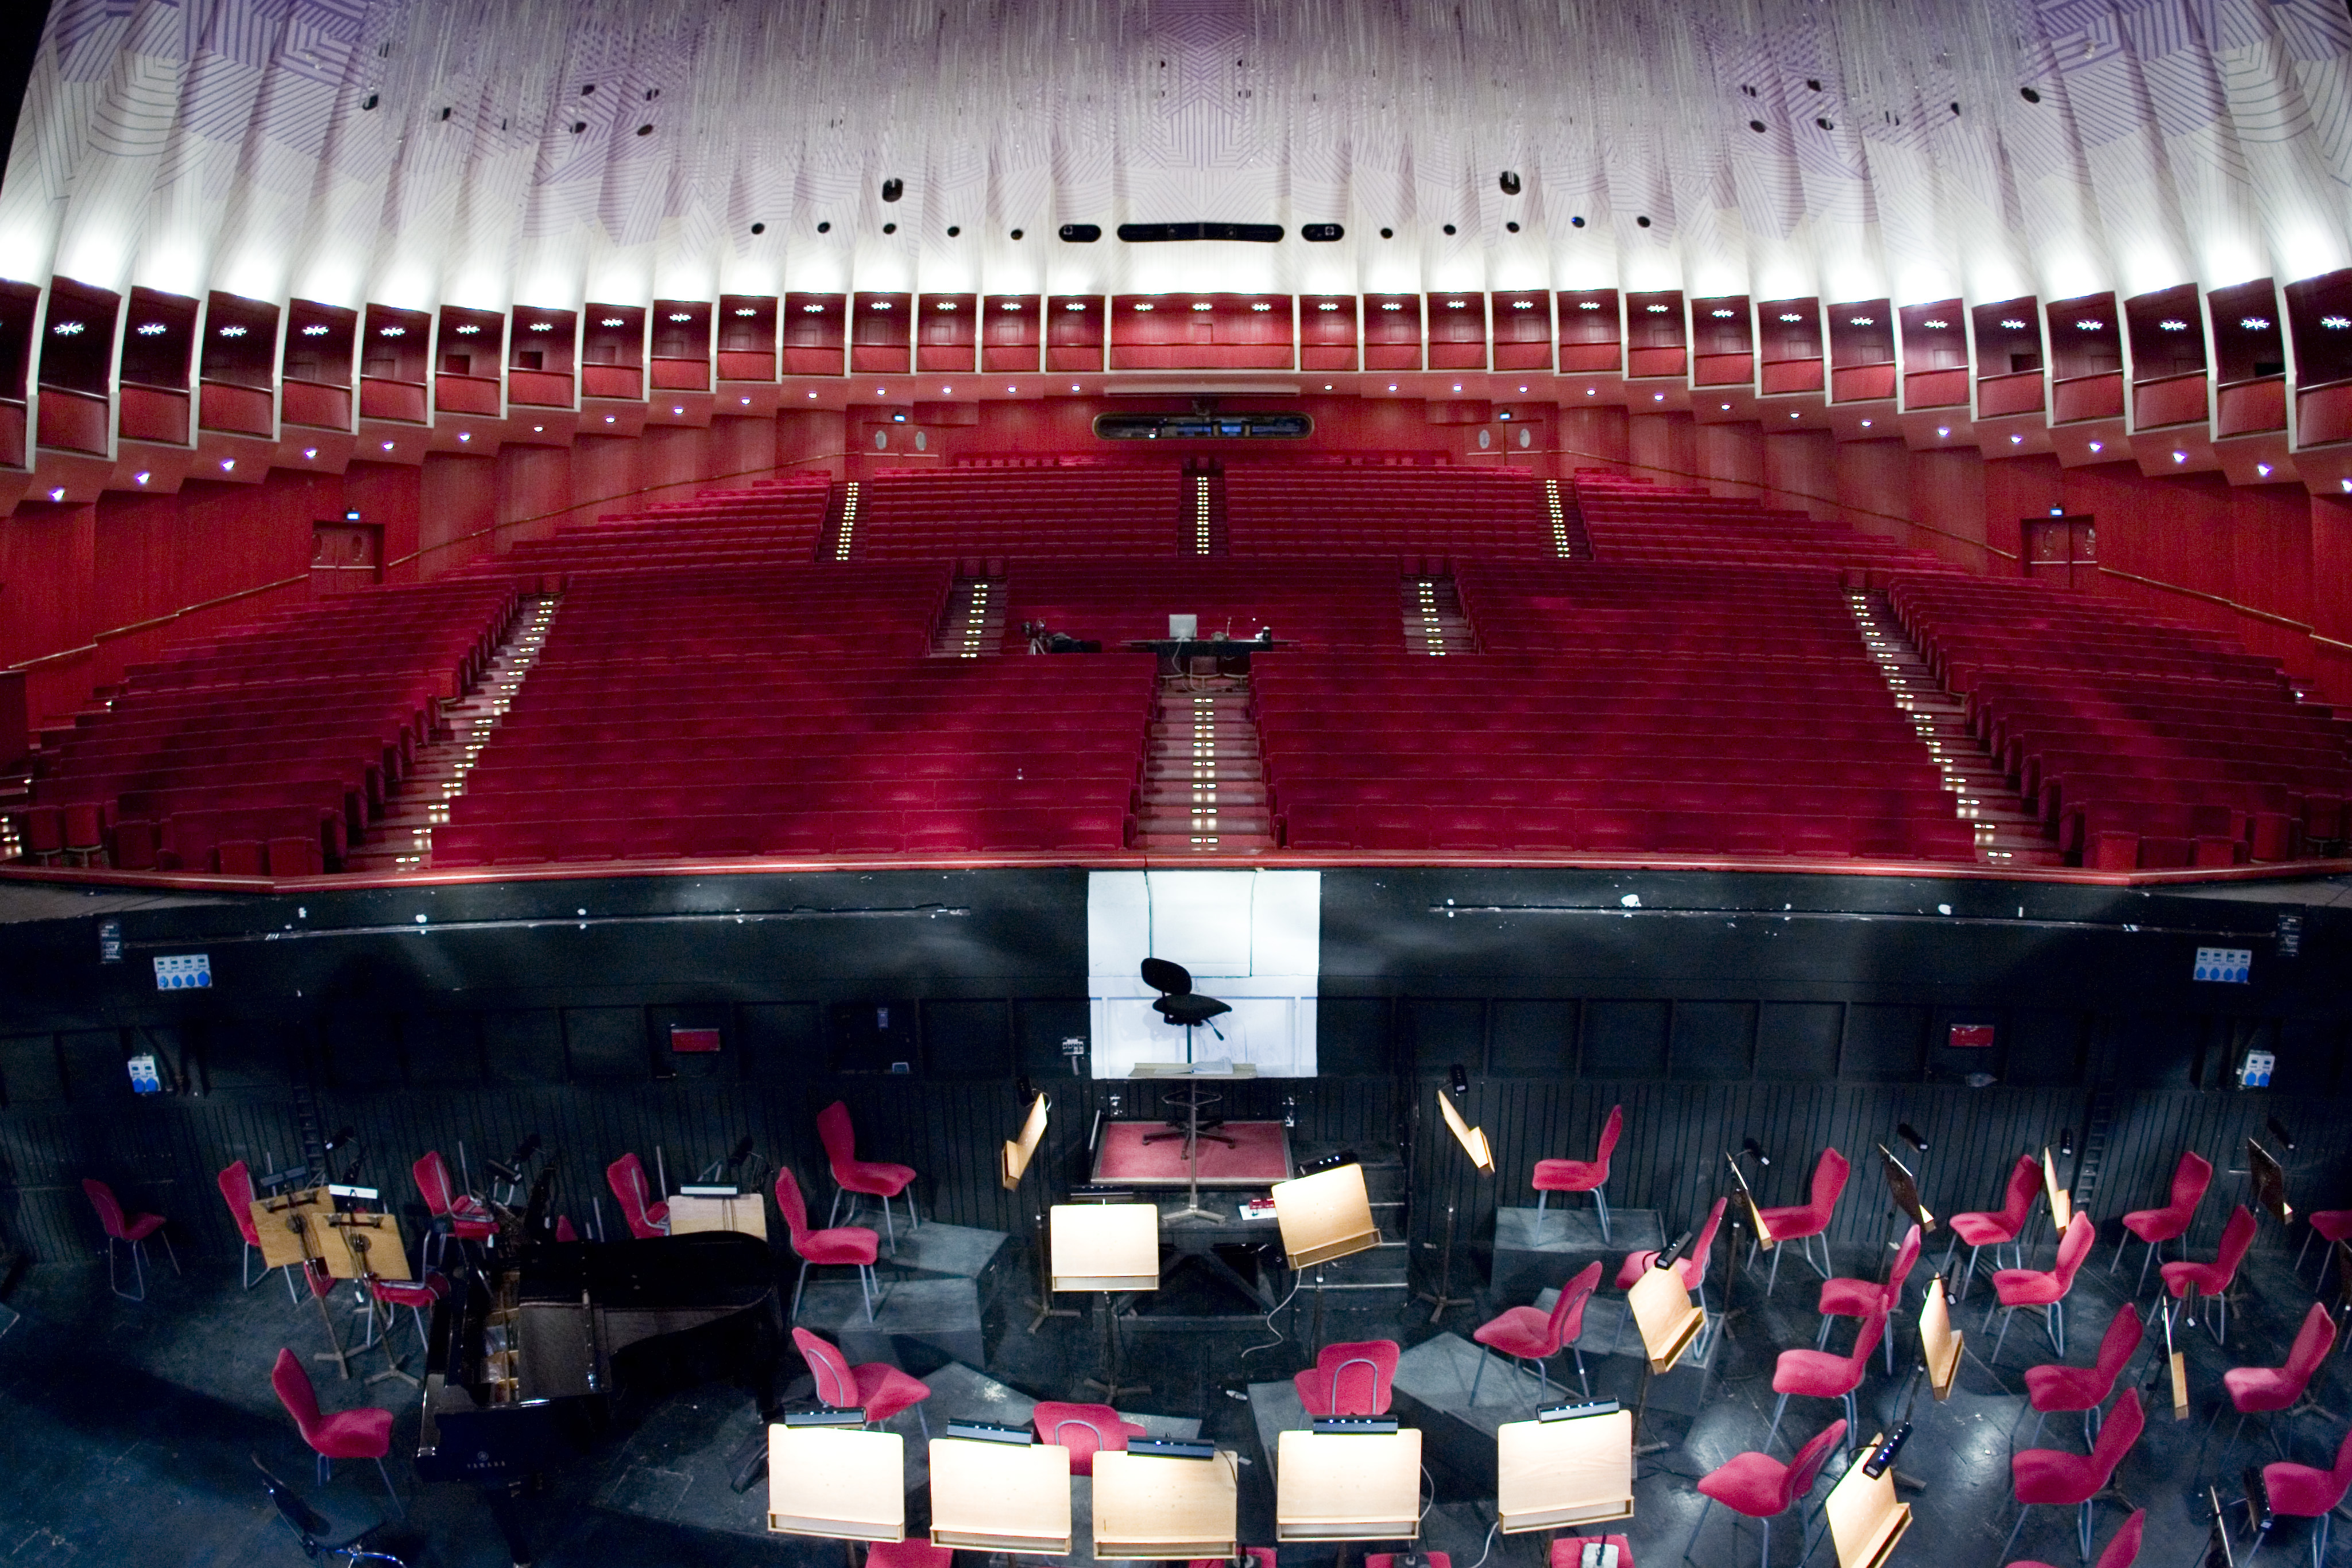 The orchestra pit (and the auditorium) seen from the stage